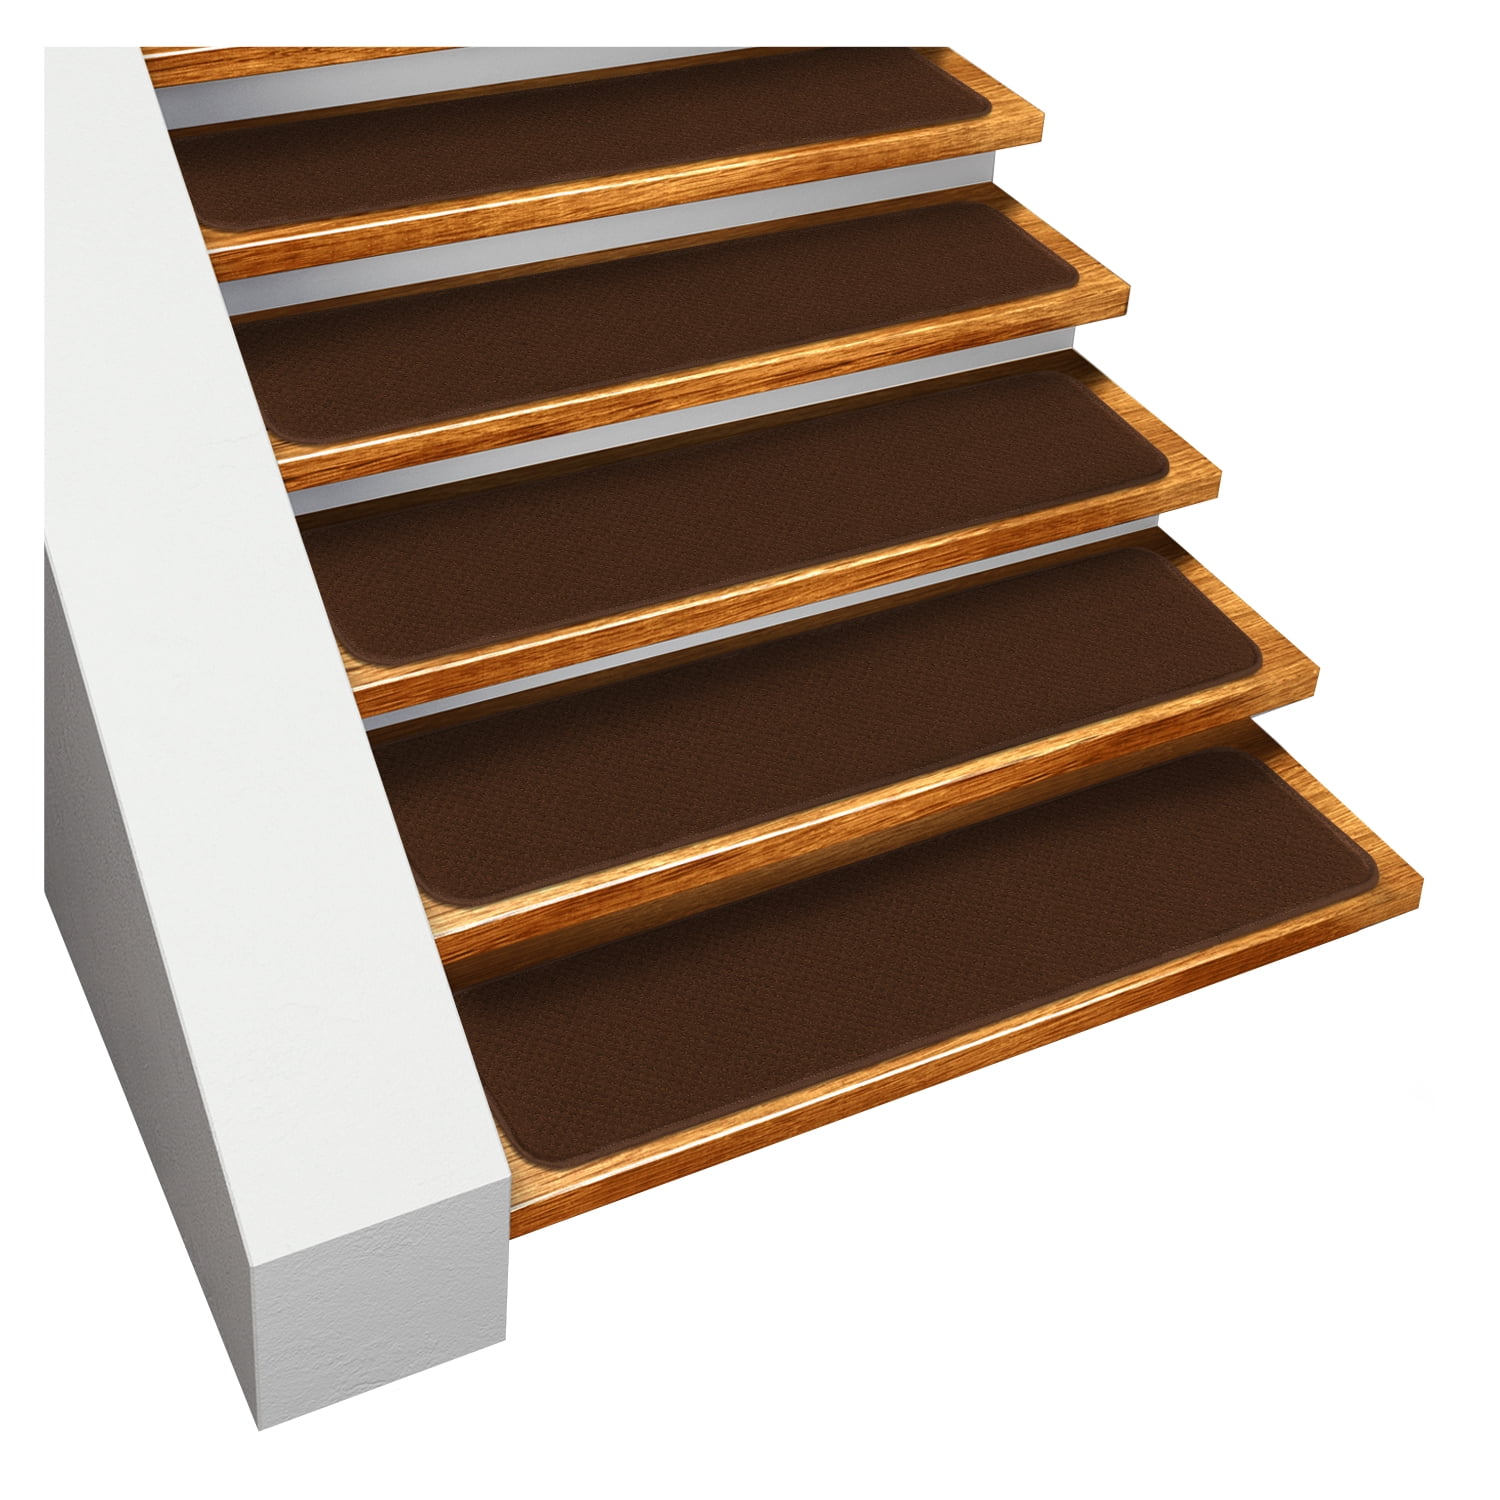 -  24" x 8" 509 NFSI High Traction Brown Vinyl Stair Tread Sets 